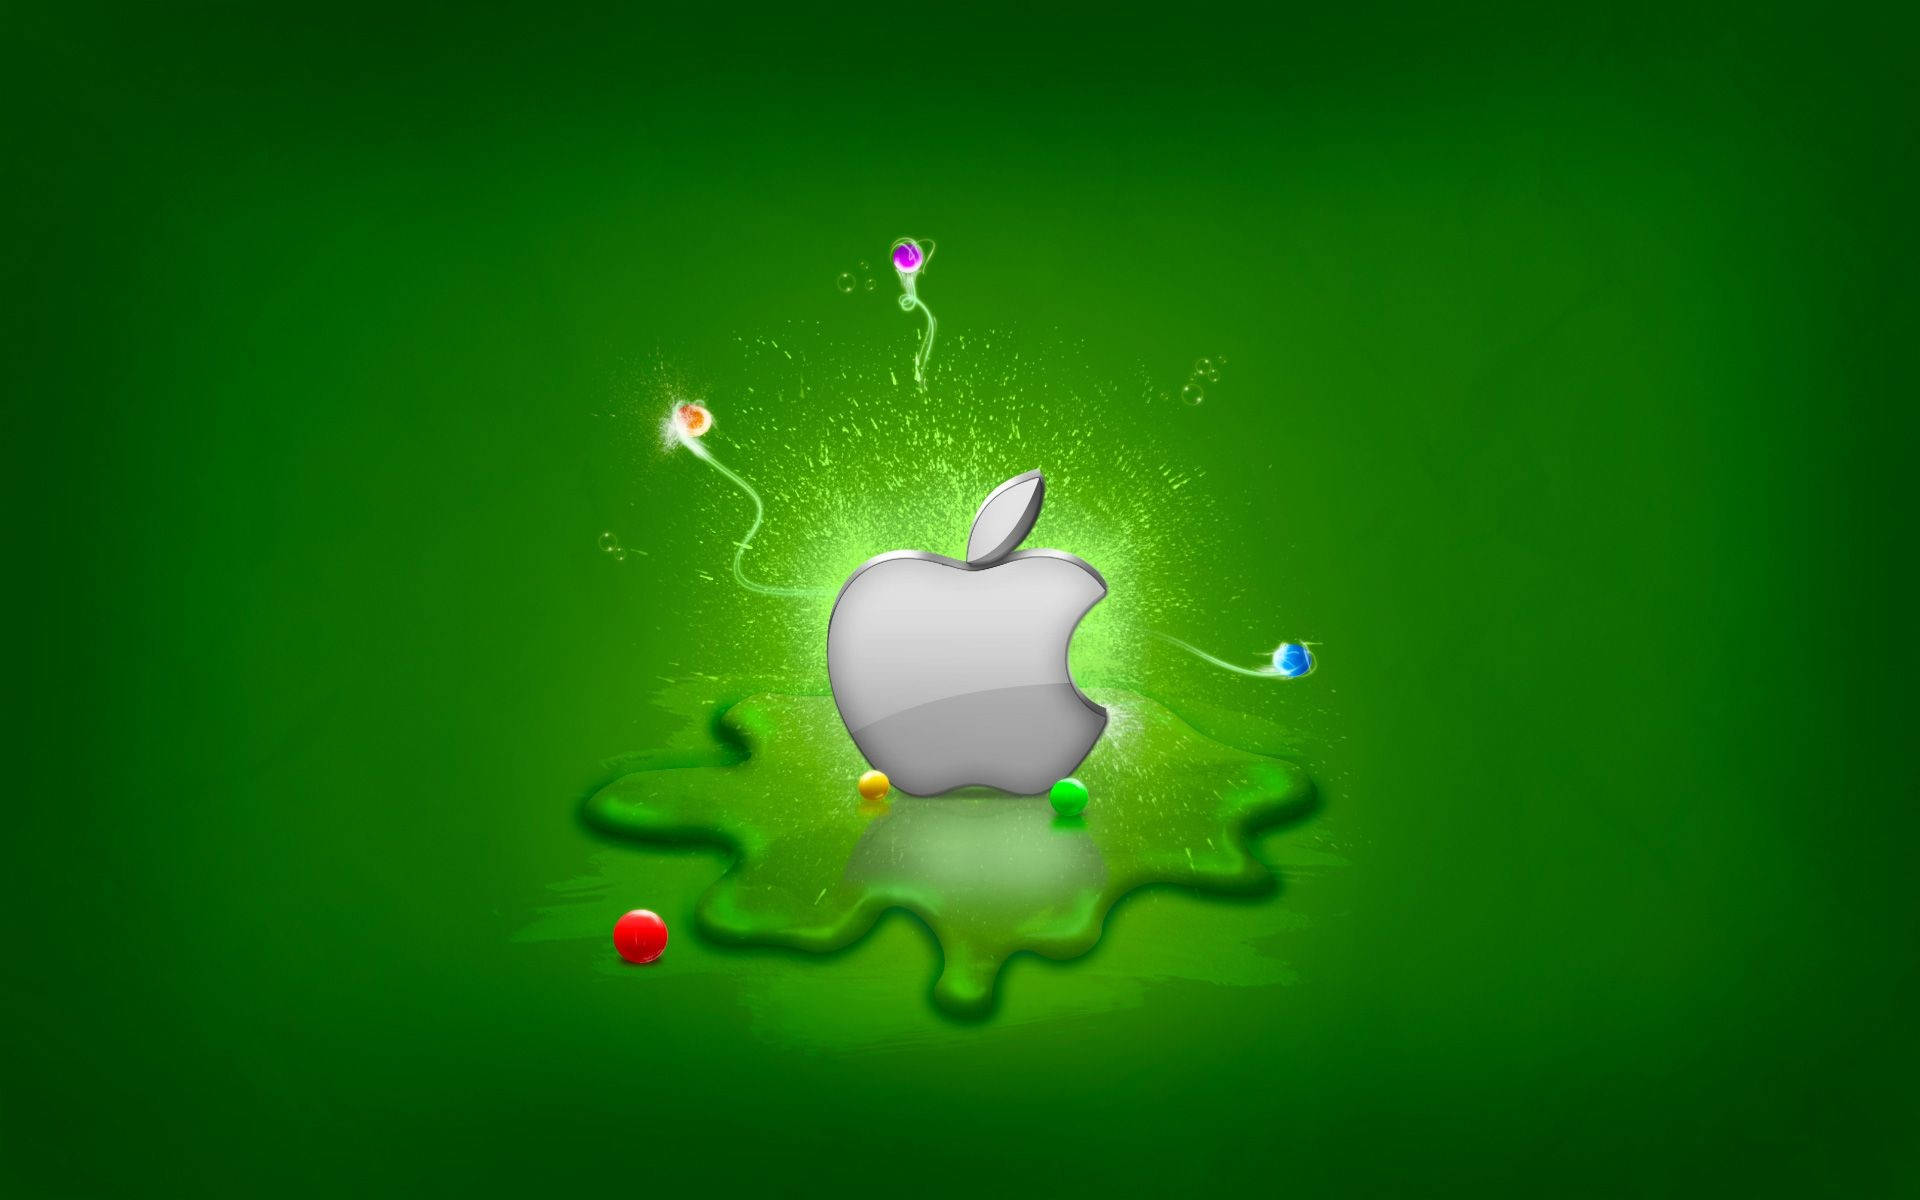 Silver Apple Logo Mac Os Picture